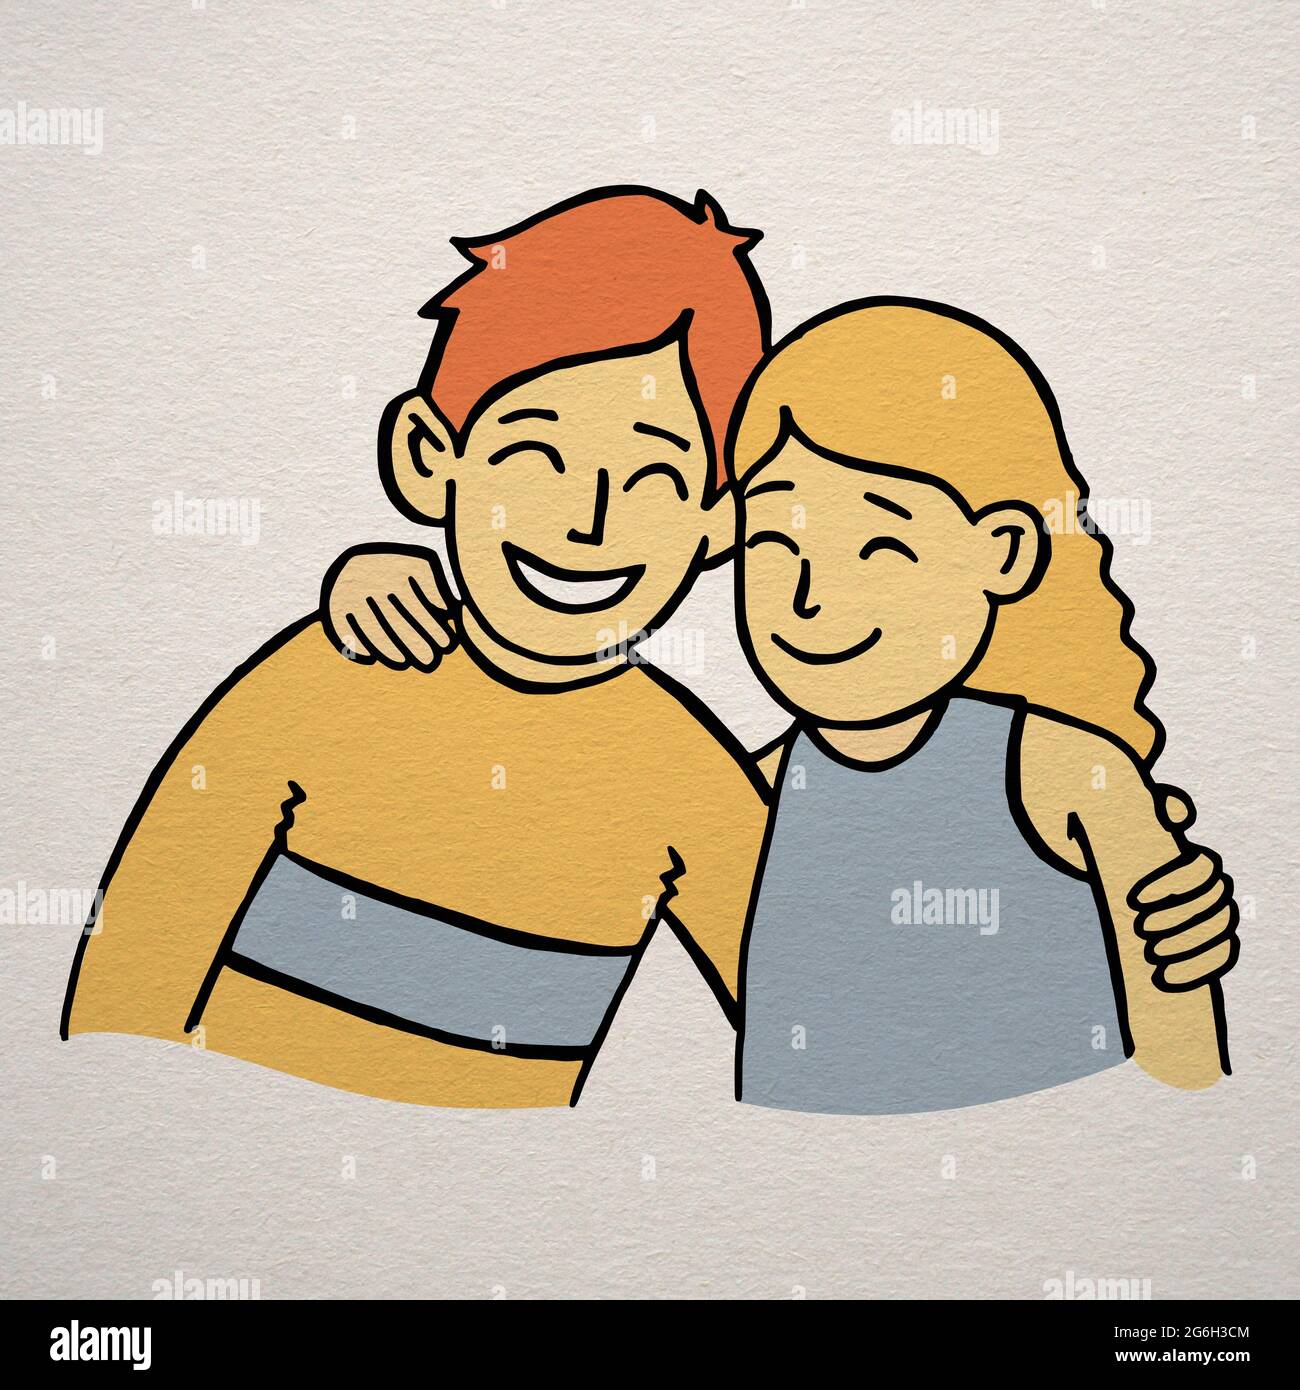 A happy positive boy and a cute smiling girl hugging cartoon style  illustration - Brother and sister drawing Stock Photo - Alamy